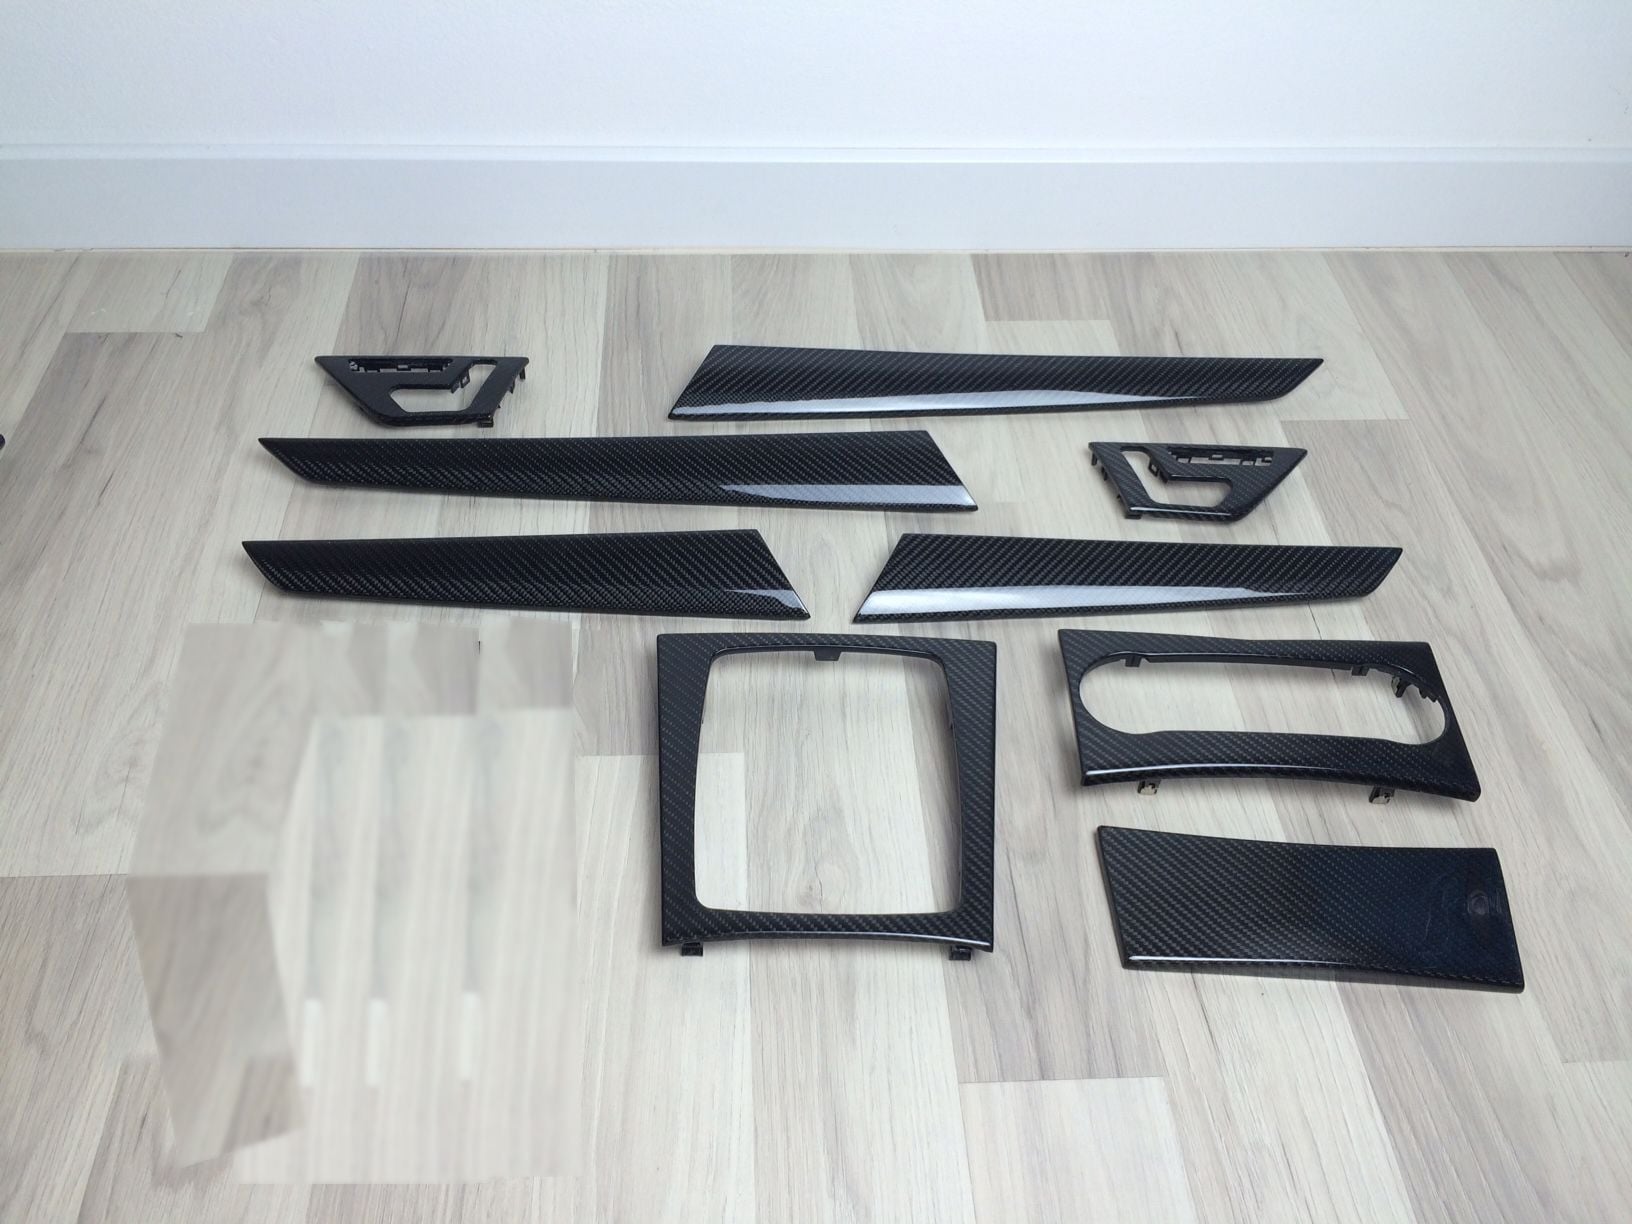 Interior/Upholstery - FS: New Carbon Interior Trims for 08-11 C63 AMG / C-class Sedan and Estate - New - 2008 to 2011 Mercedes-Benz C63 AMG - Kolobrzeg, Poland